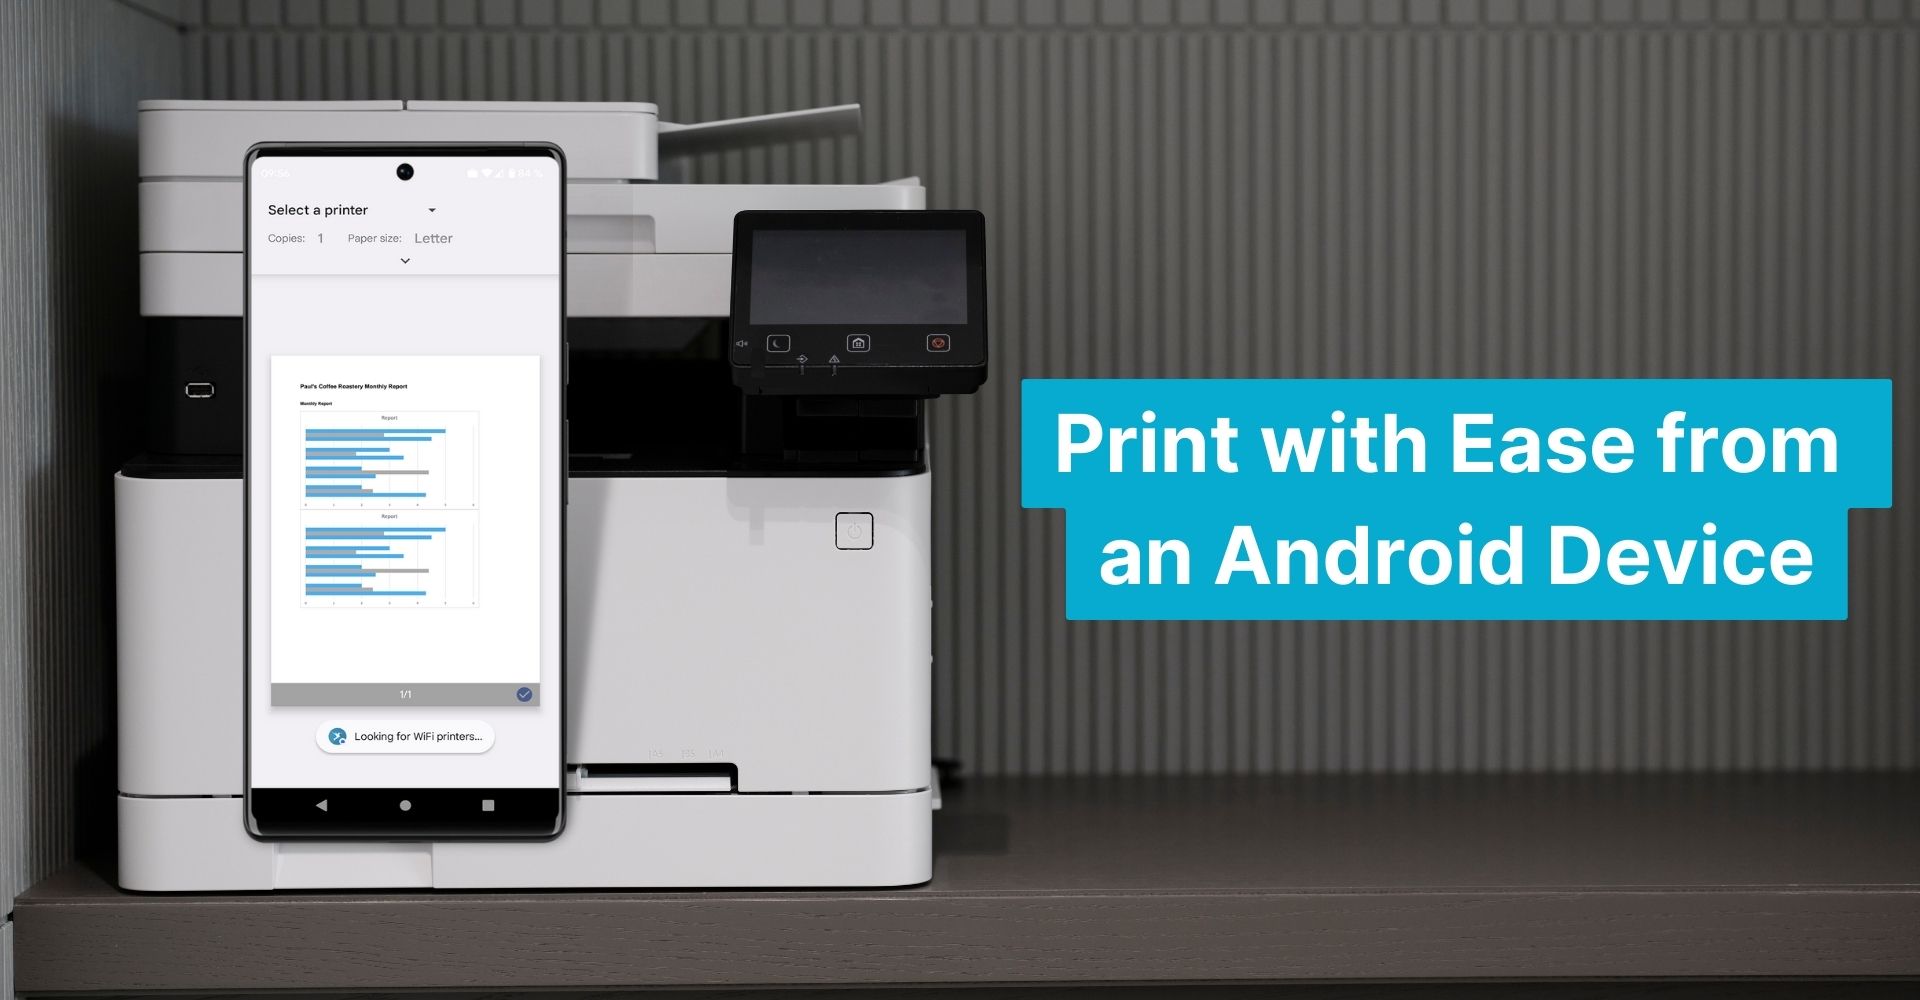 How to print from your Android smartphone or tablet